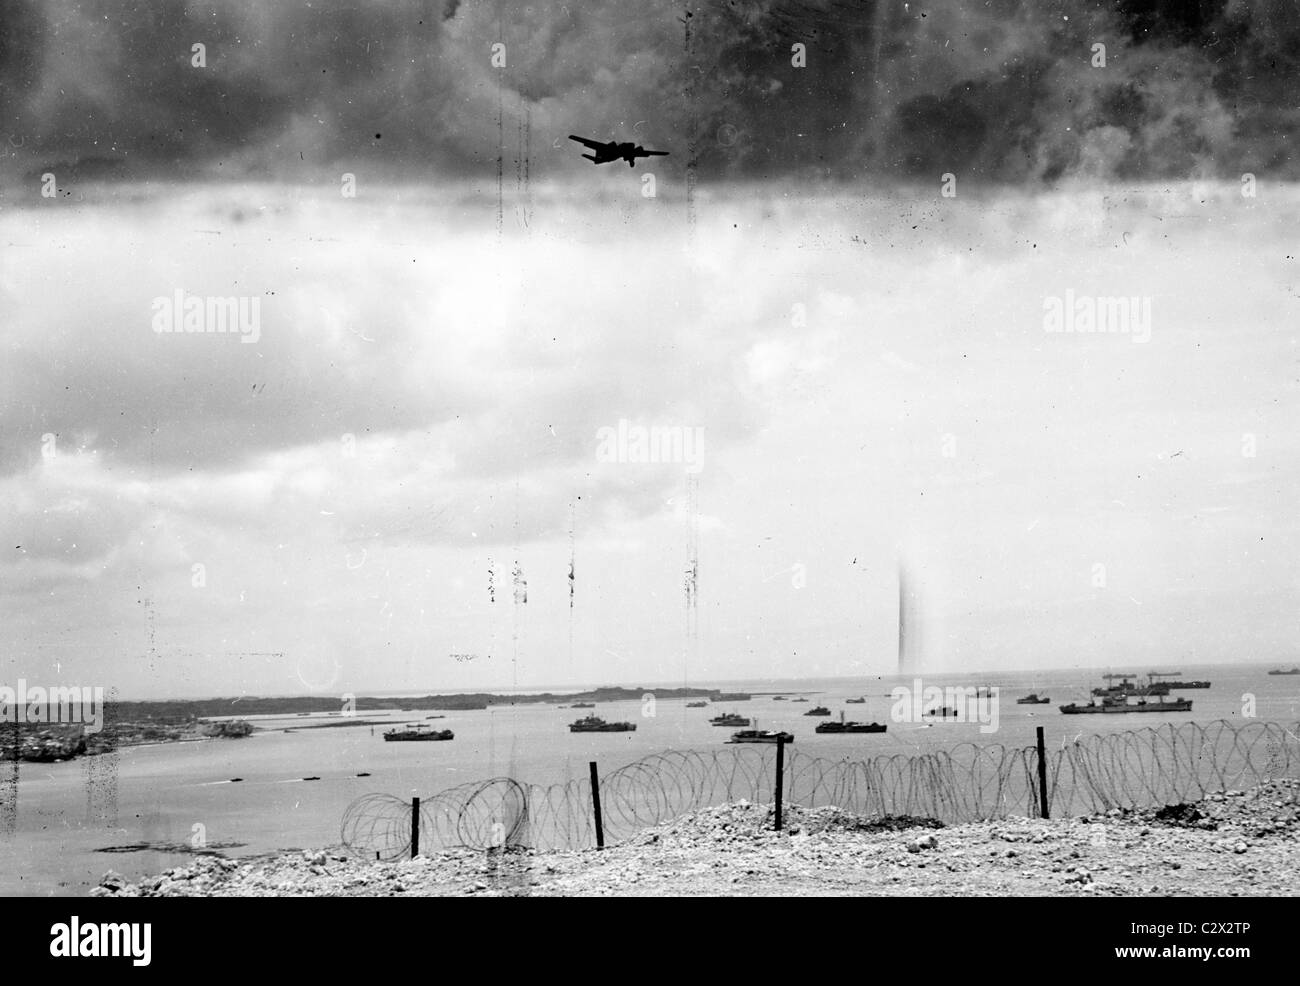 Razor wire perimeter frames bay with ships while B29 flies over on a cloudy day in a photograph made on Okinawa in circa 1945 Stock Photo